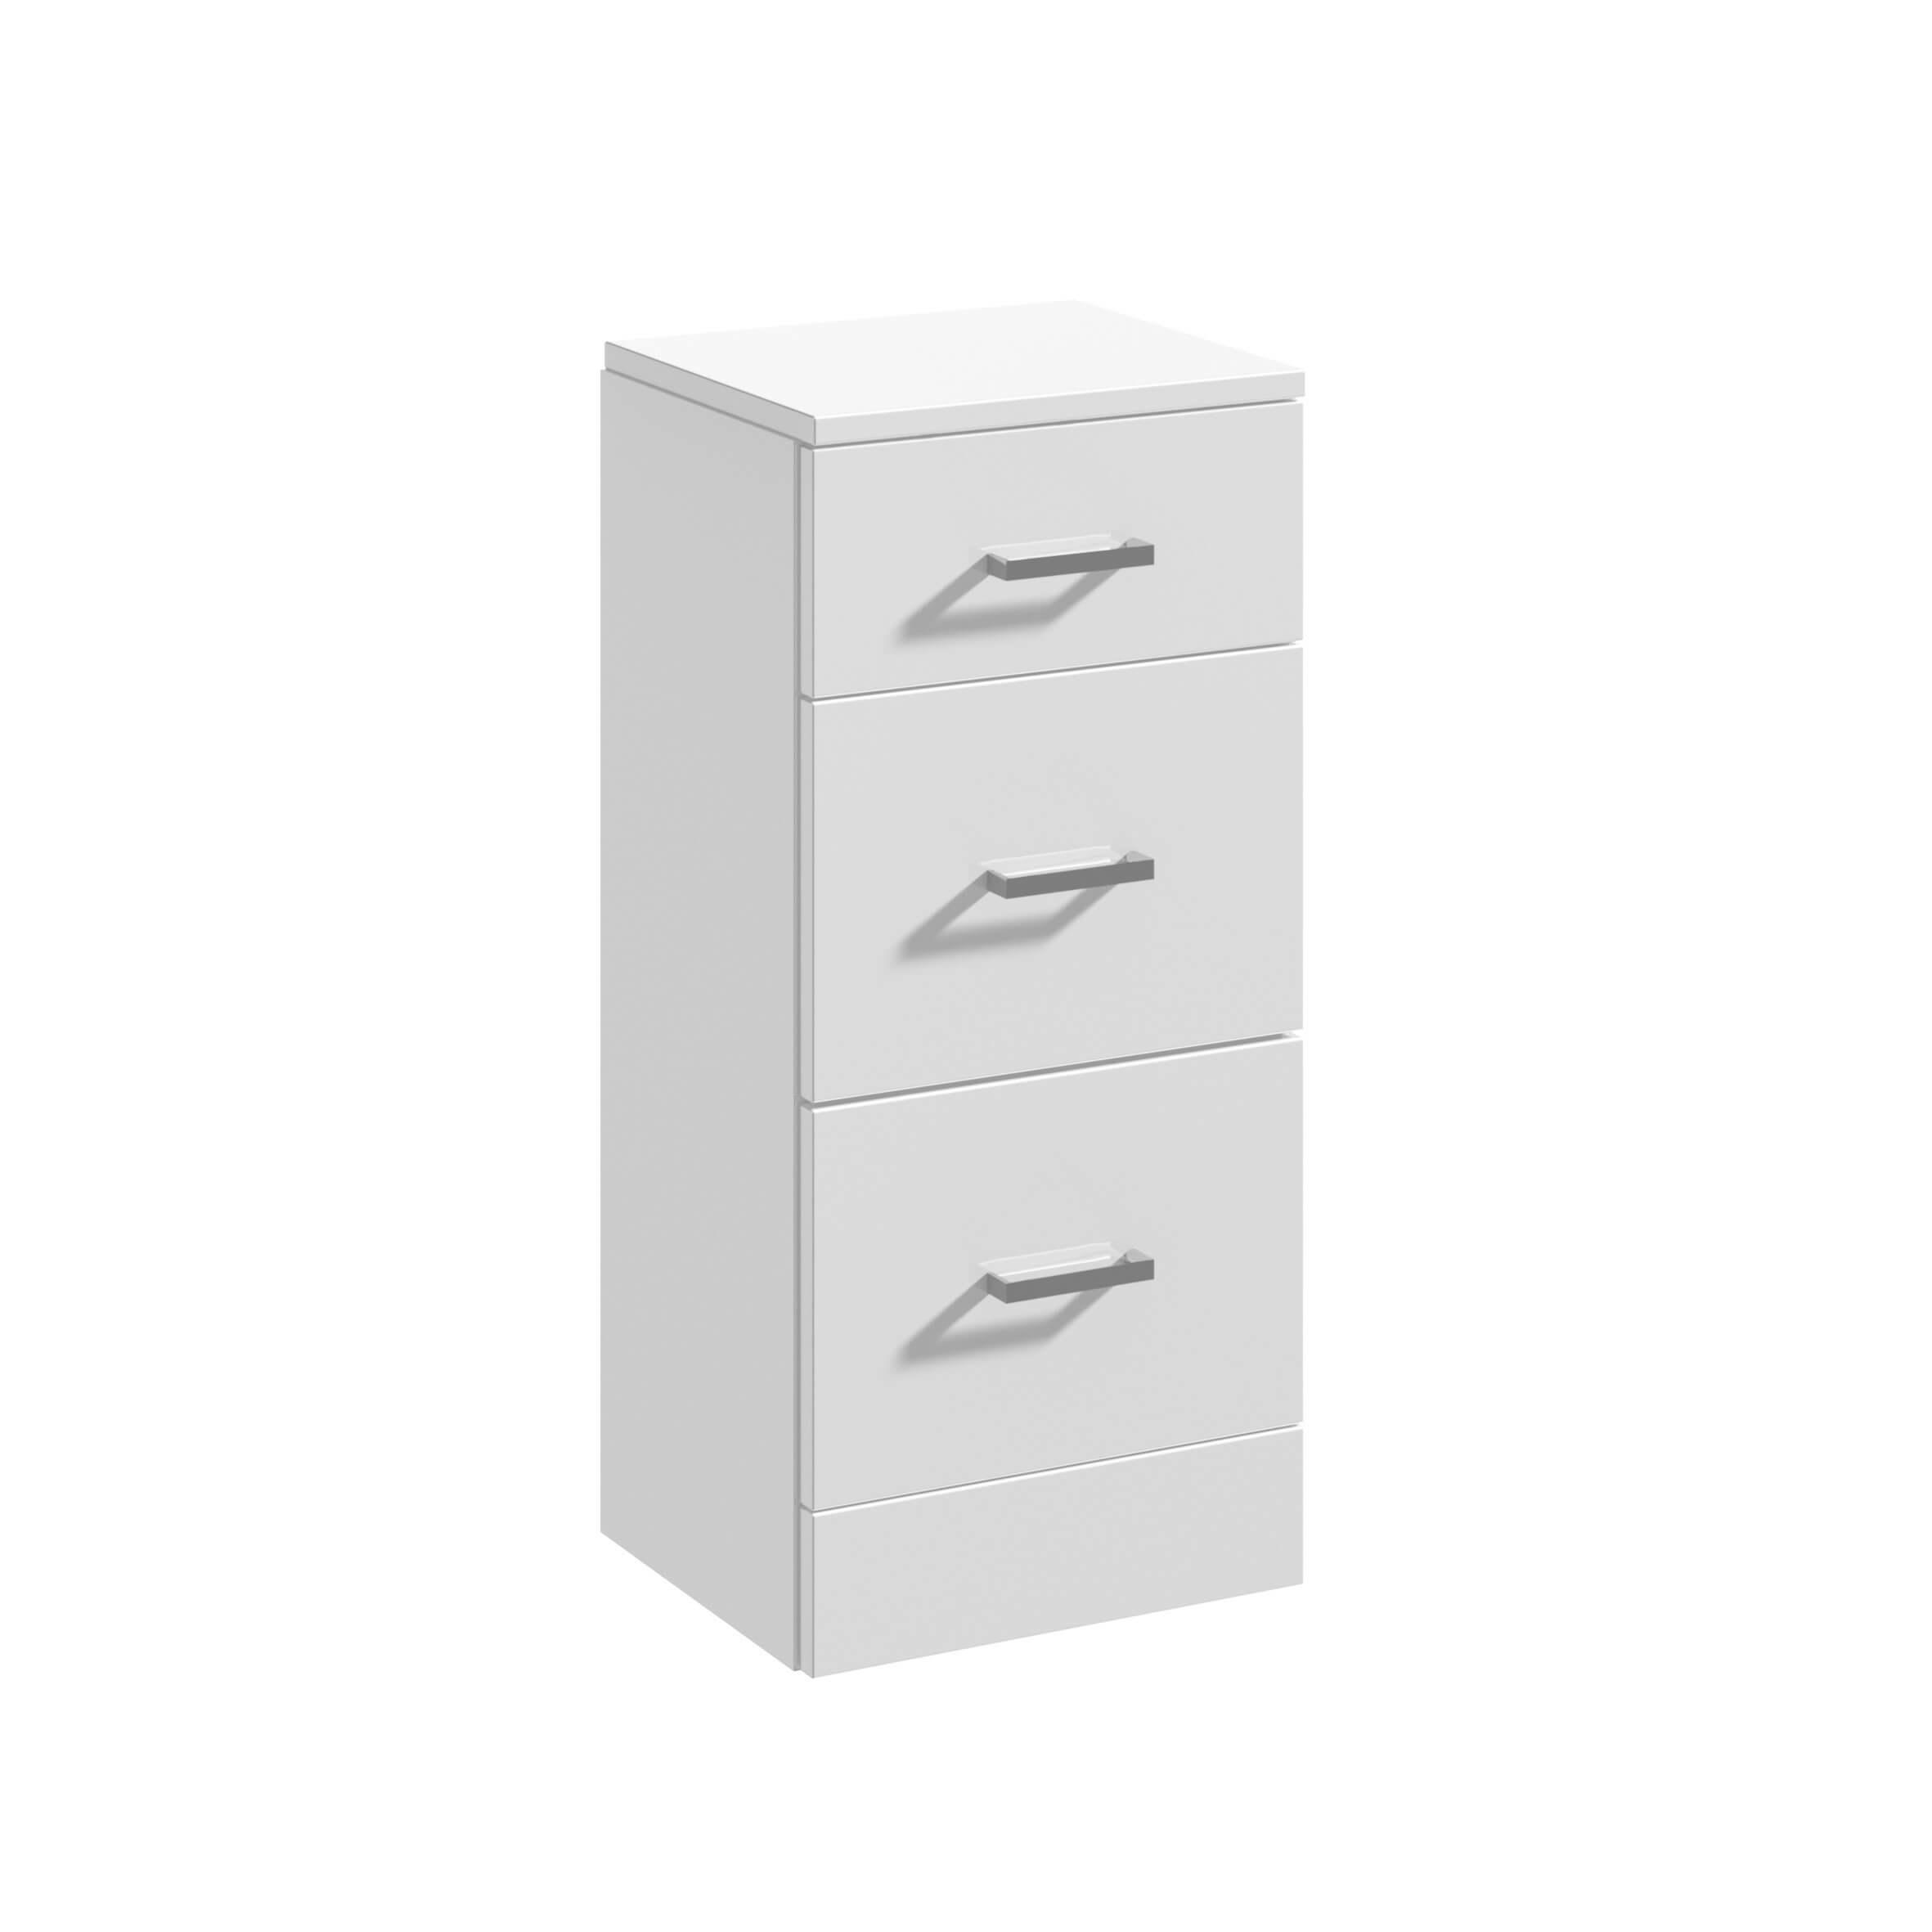 An image of Nuie Mayford Classic 768Mm Tall 3 Drawers White Bathroom Cabinet Unit Rigid Buil...